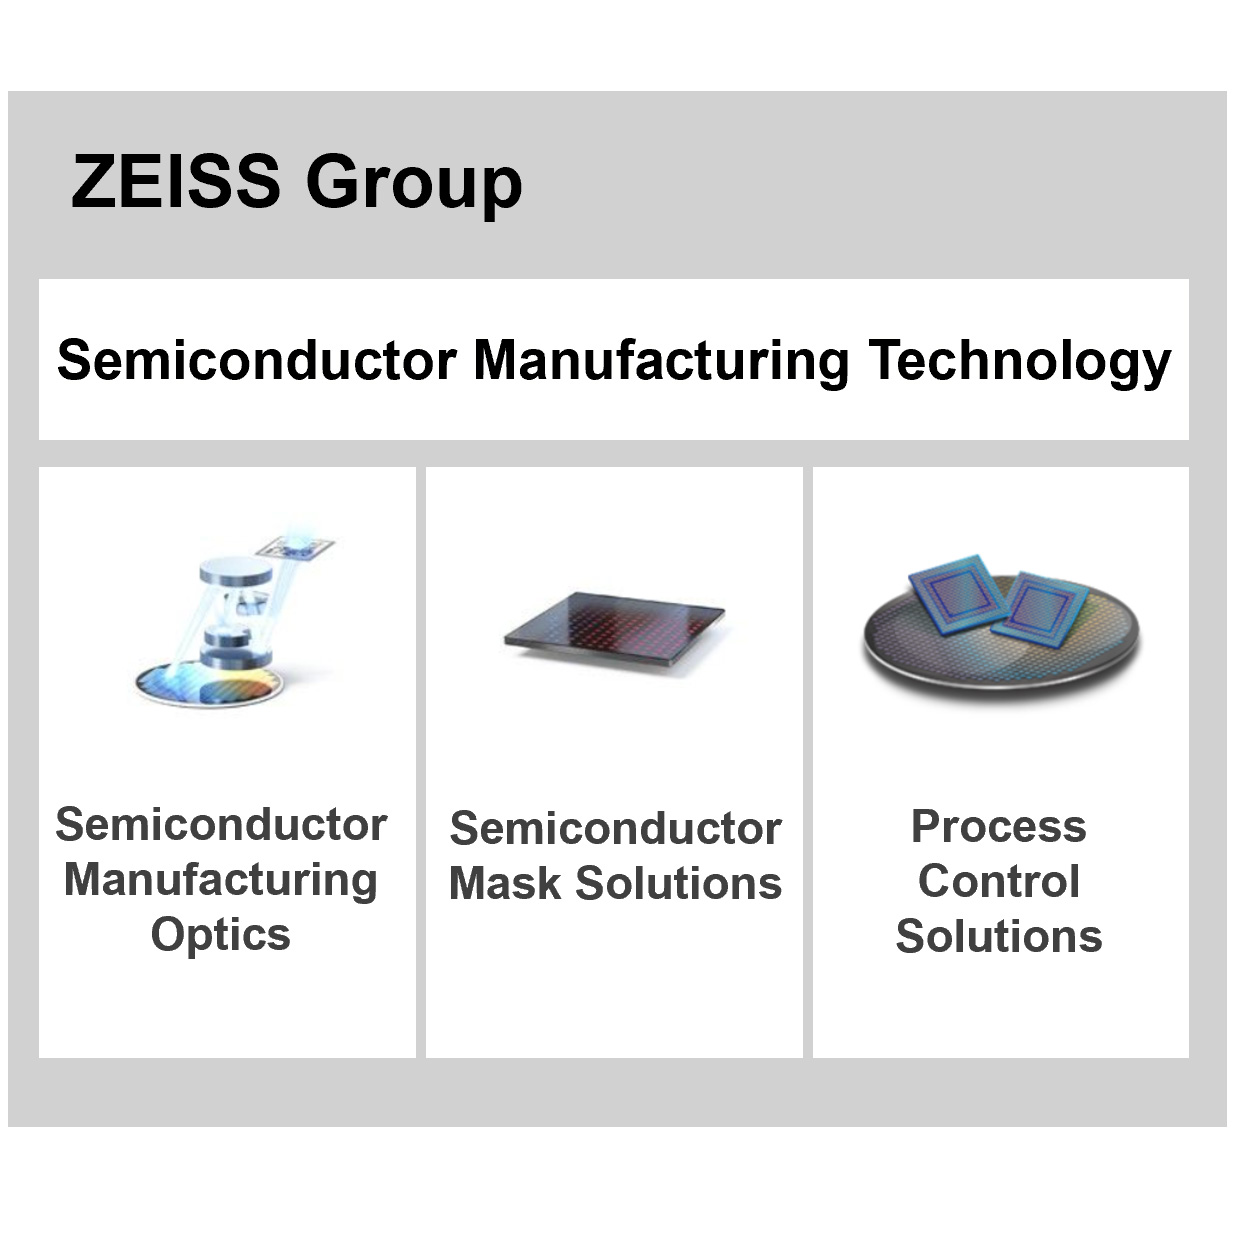 The corporate structure of ZEISS SMT with all Business Units 